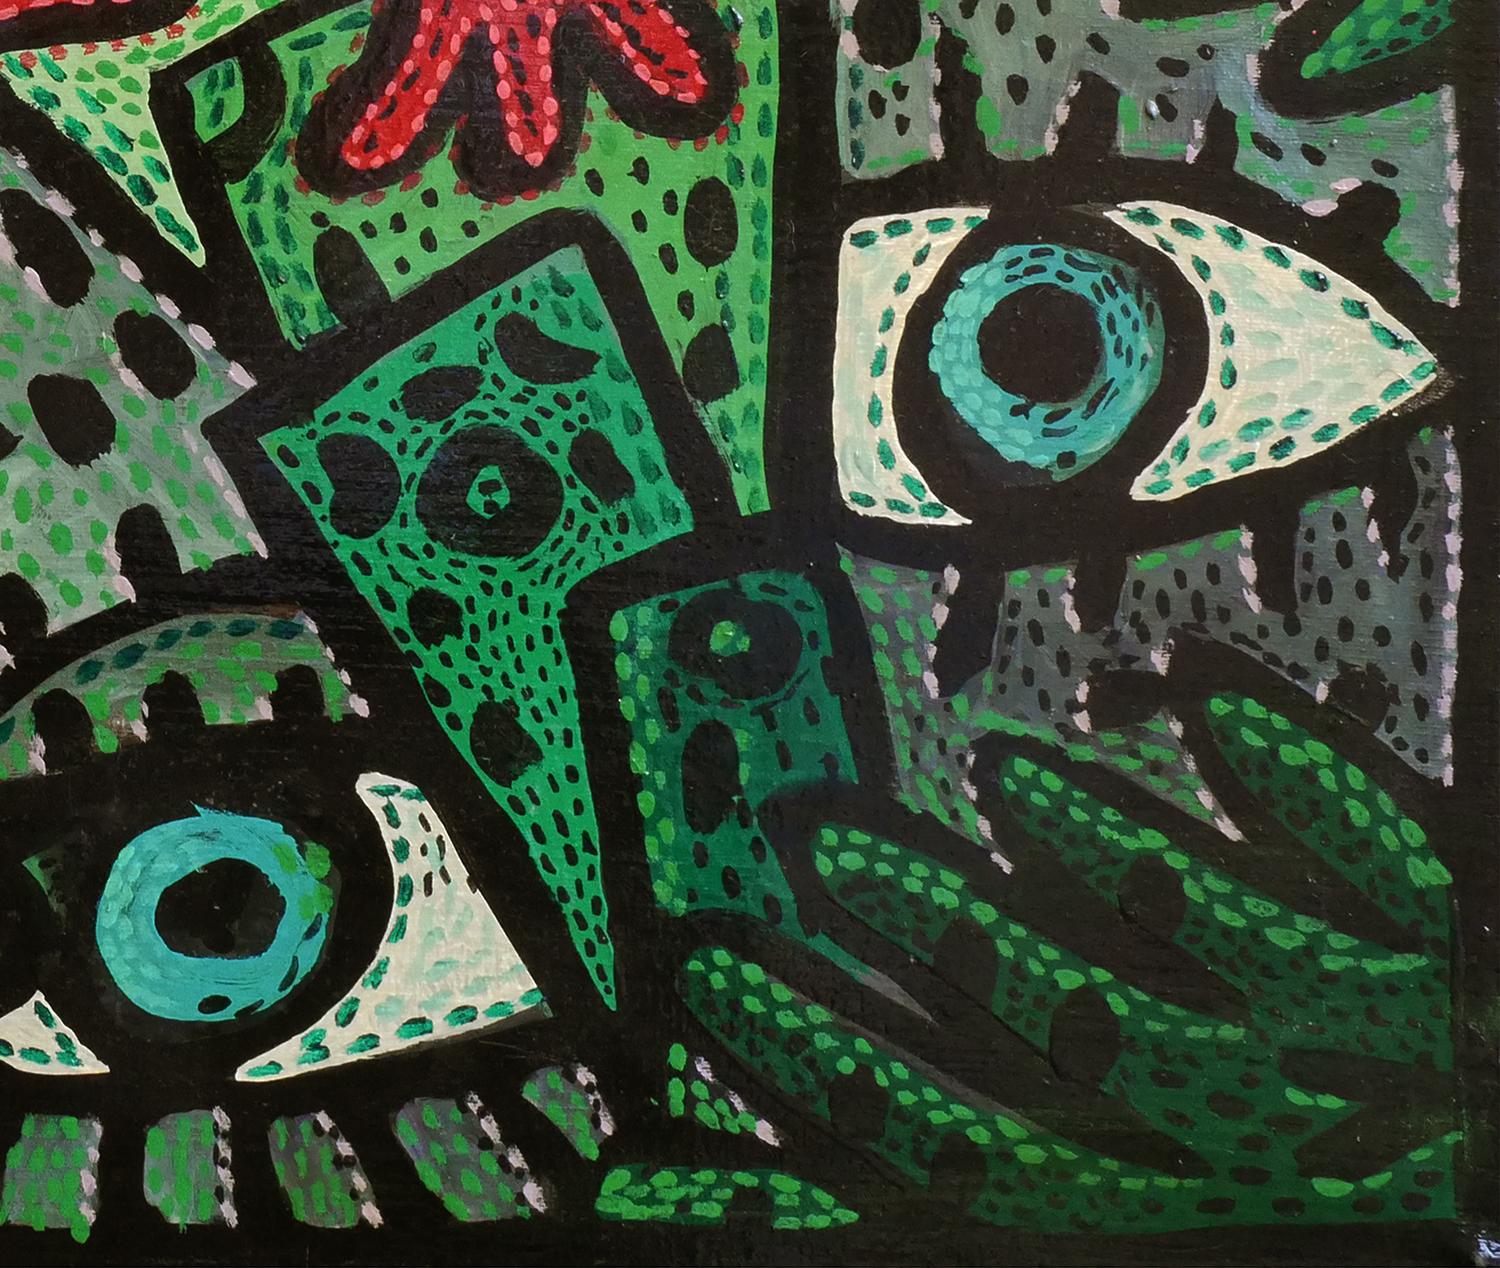 Green and red abstract contemporary painting by Houston, TX artist Richard Fluhr. This painting features abstract blue eyes against a background of abstracted green shapes that resemble hands and possibly buildings. This work has a painted black